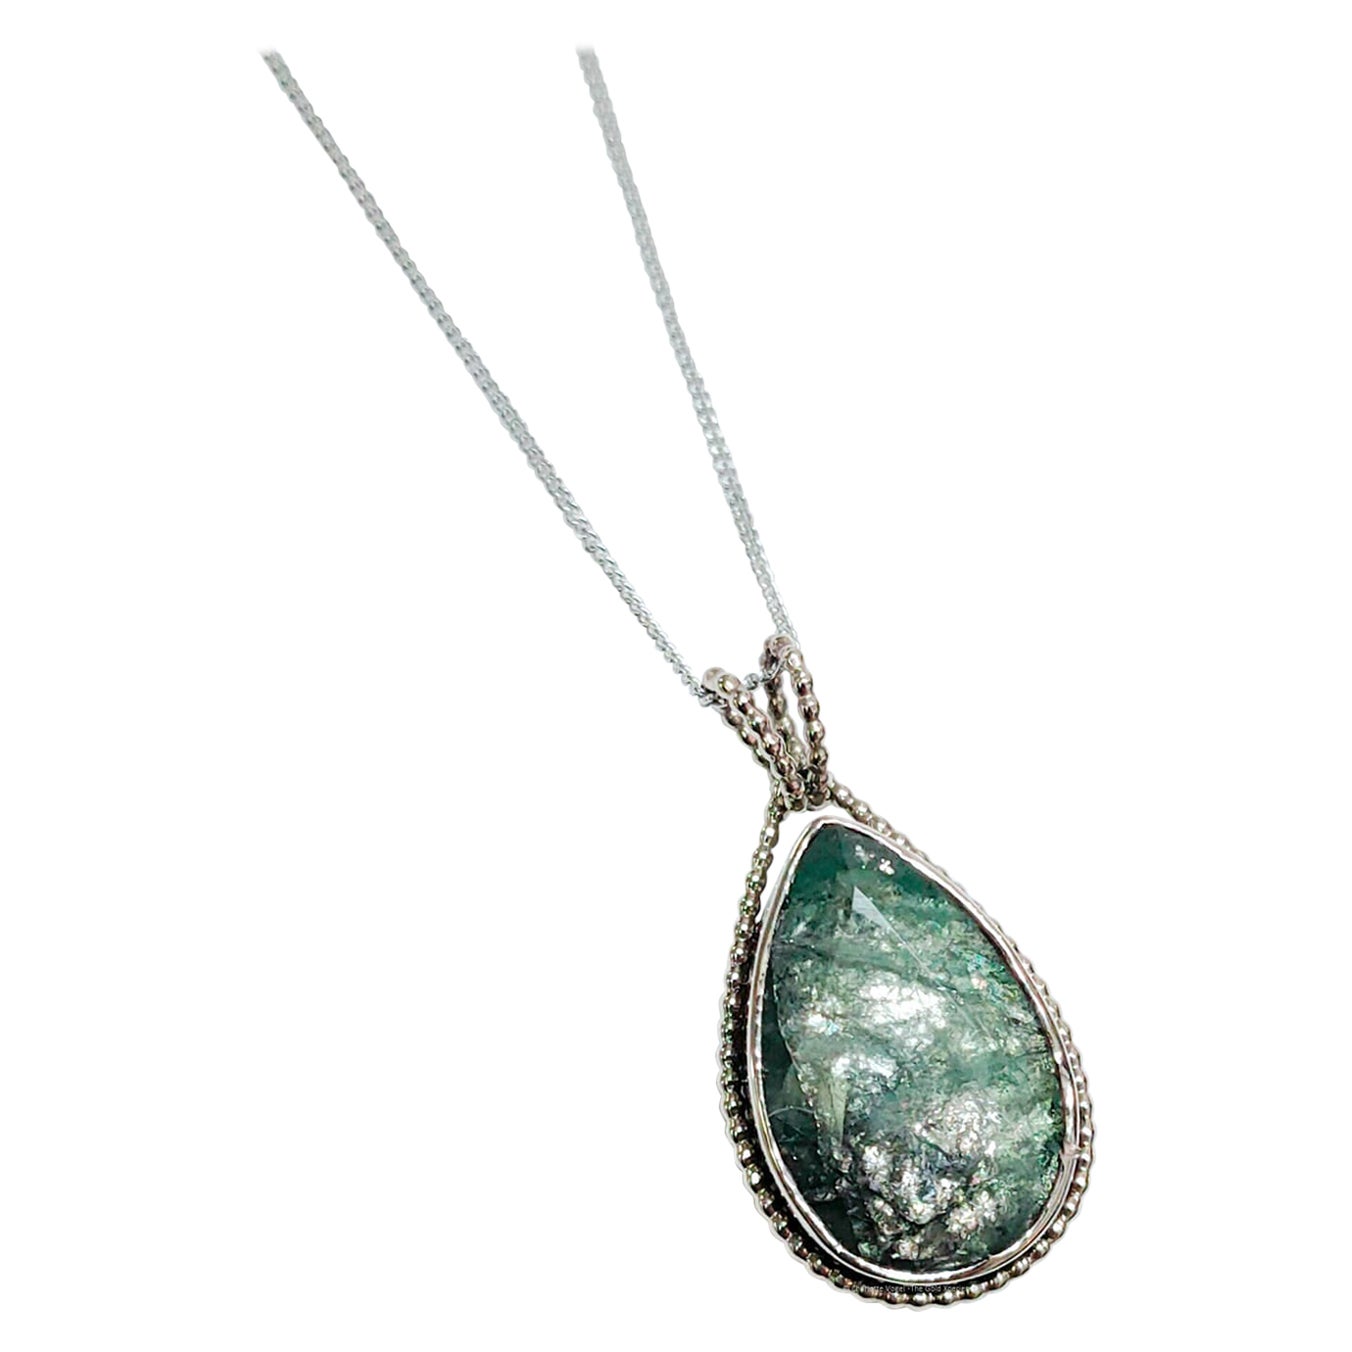 Necklace with white gold pendant emerald